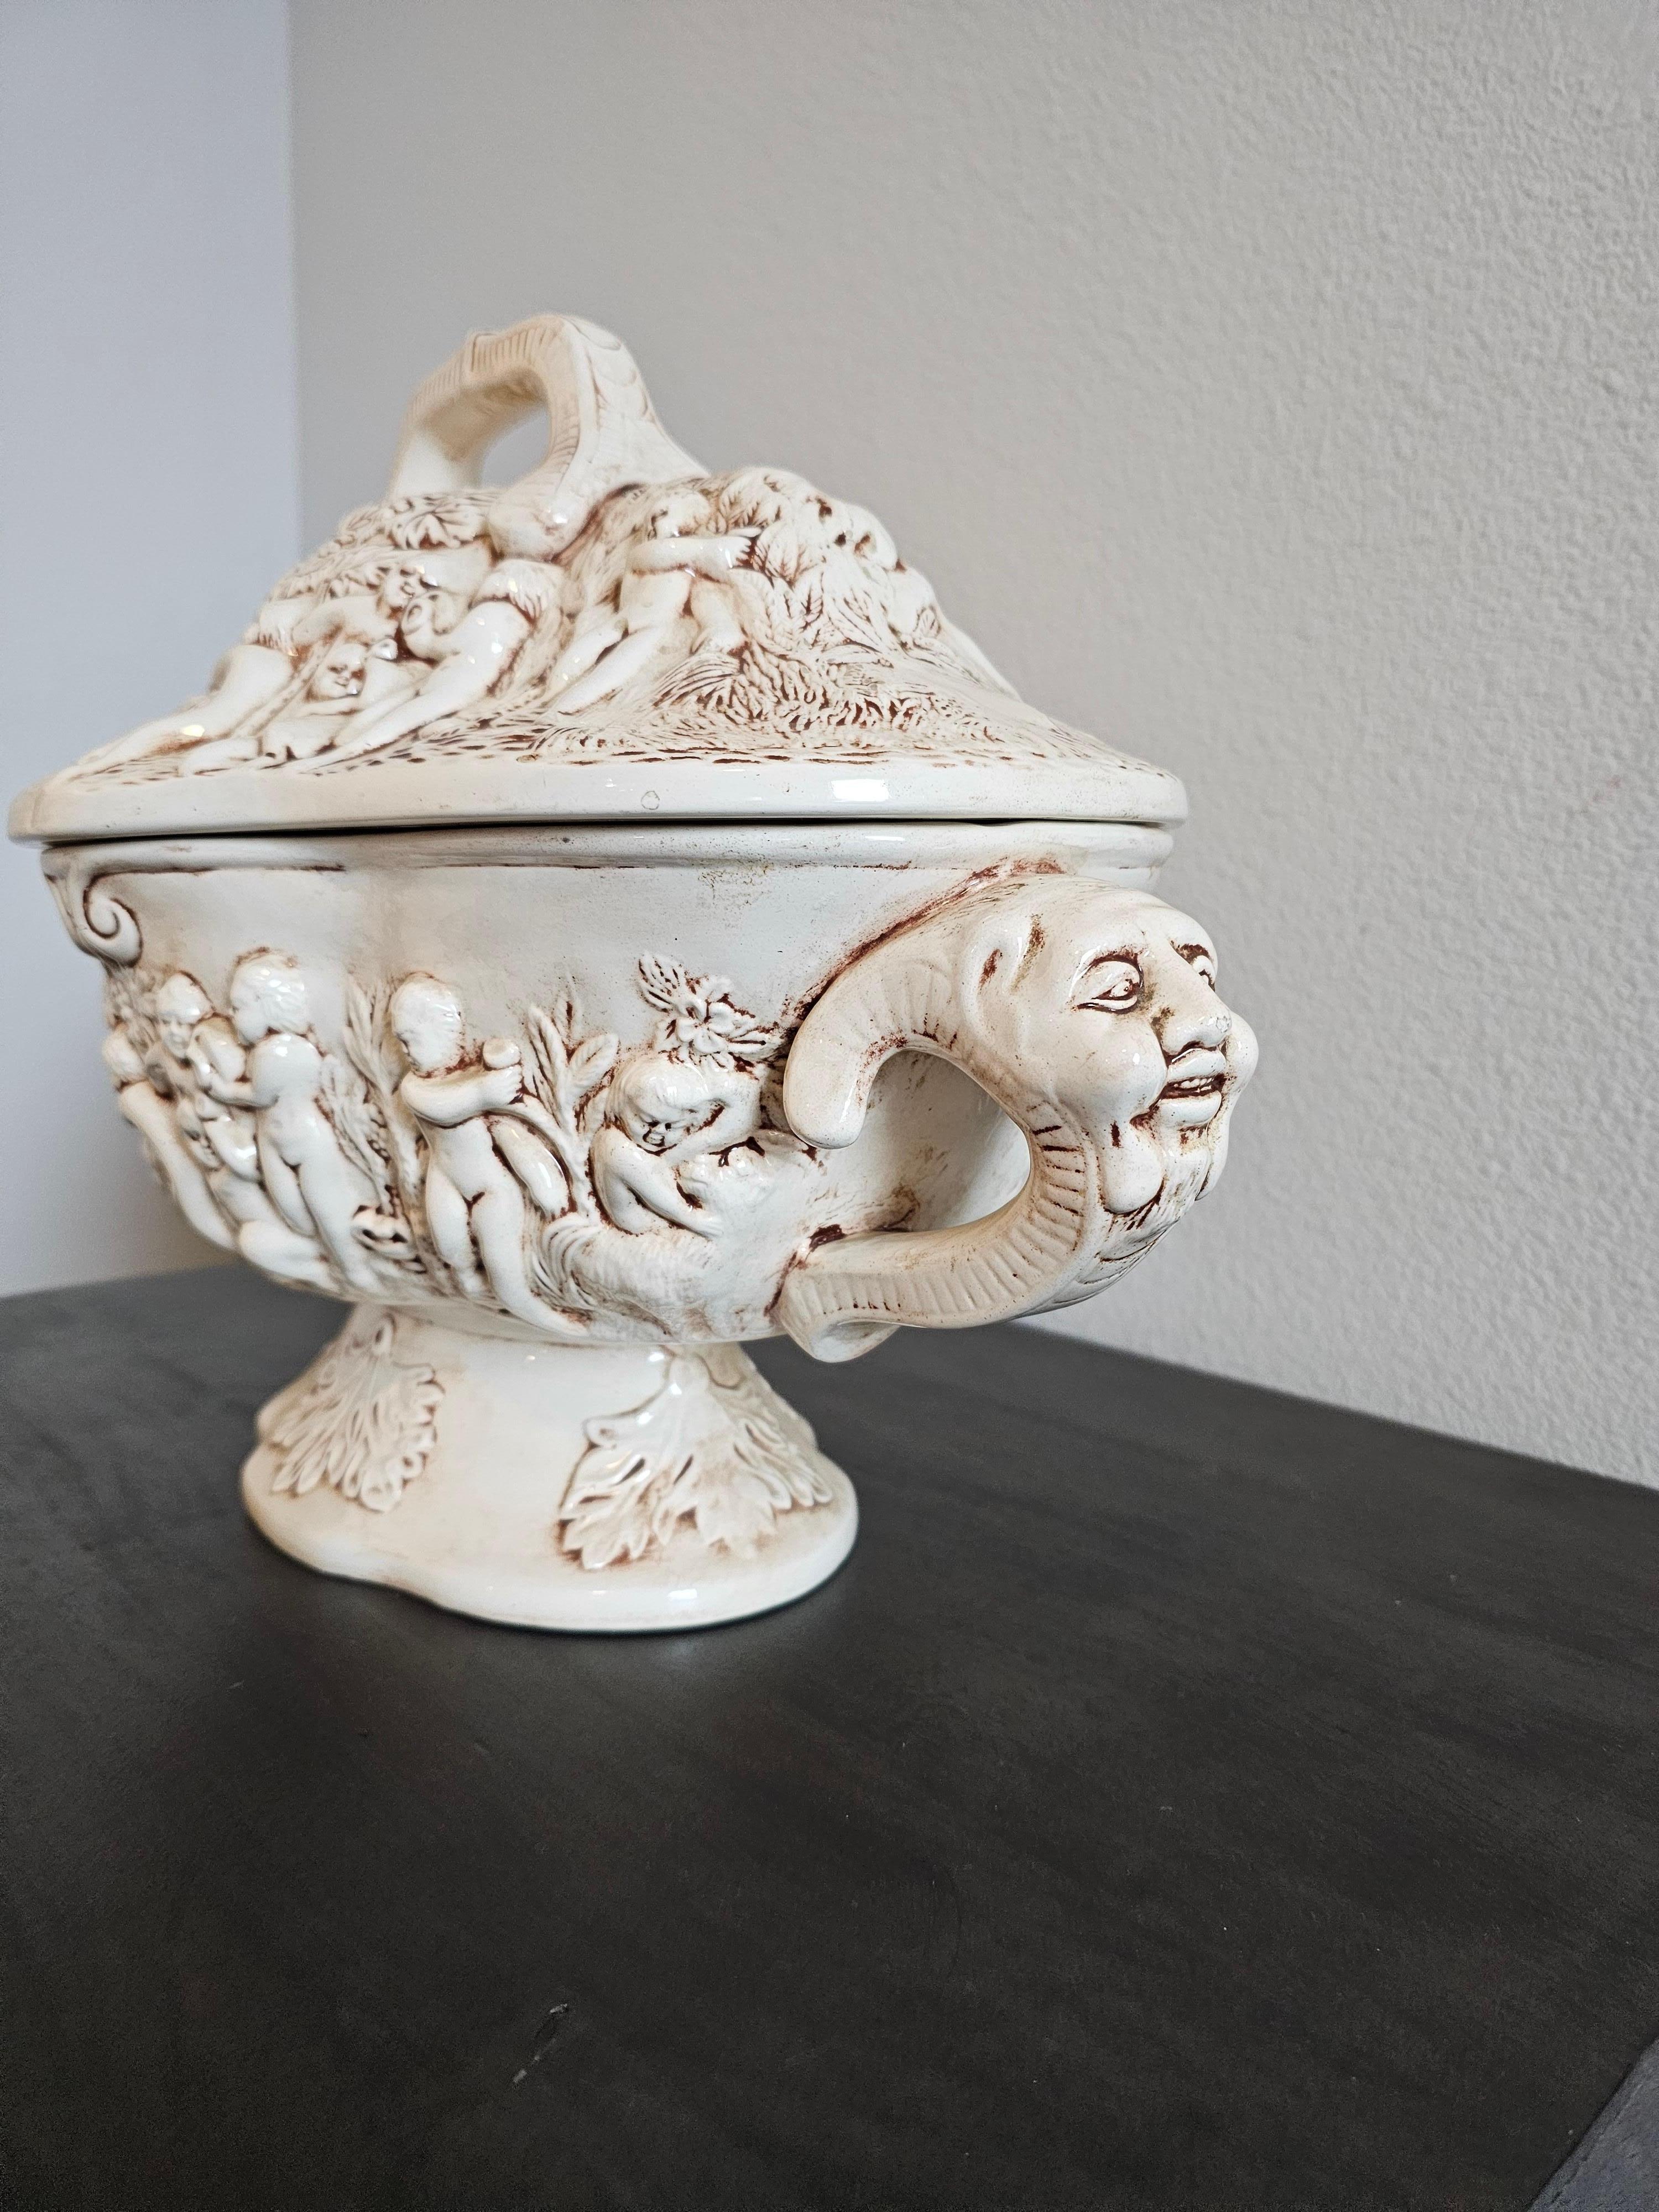 Vintage Italian Capodimonte Porcelain Covered Serving Dish Large Soup Tureen For Sale 3